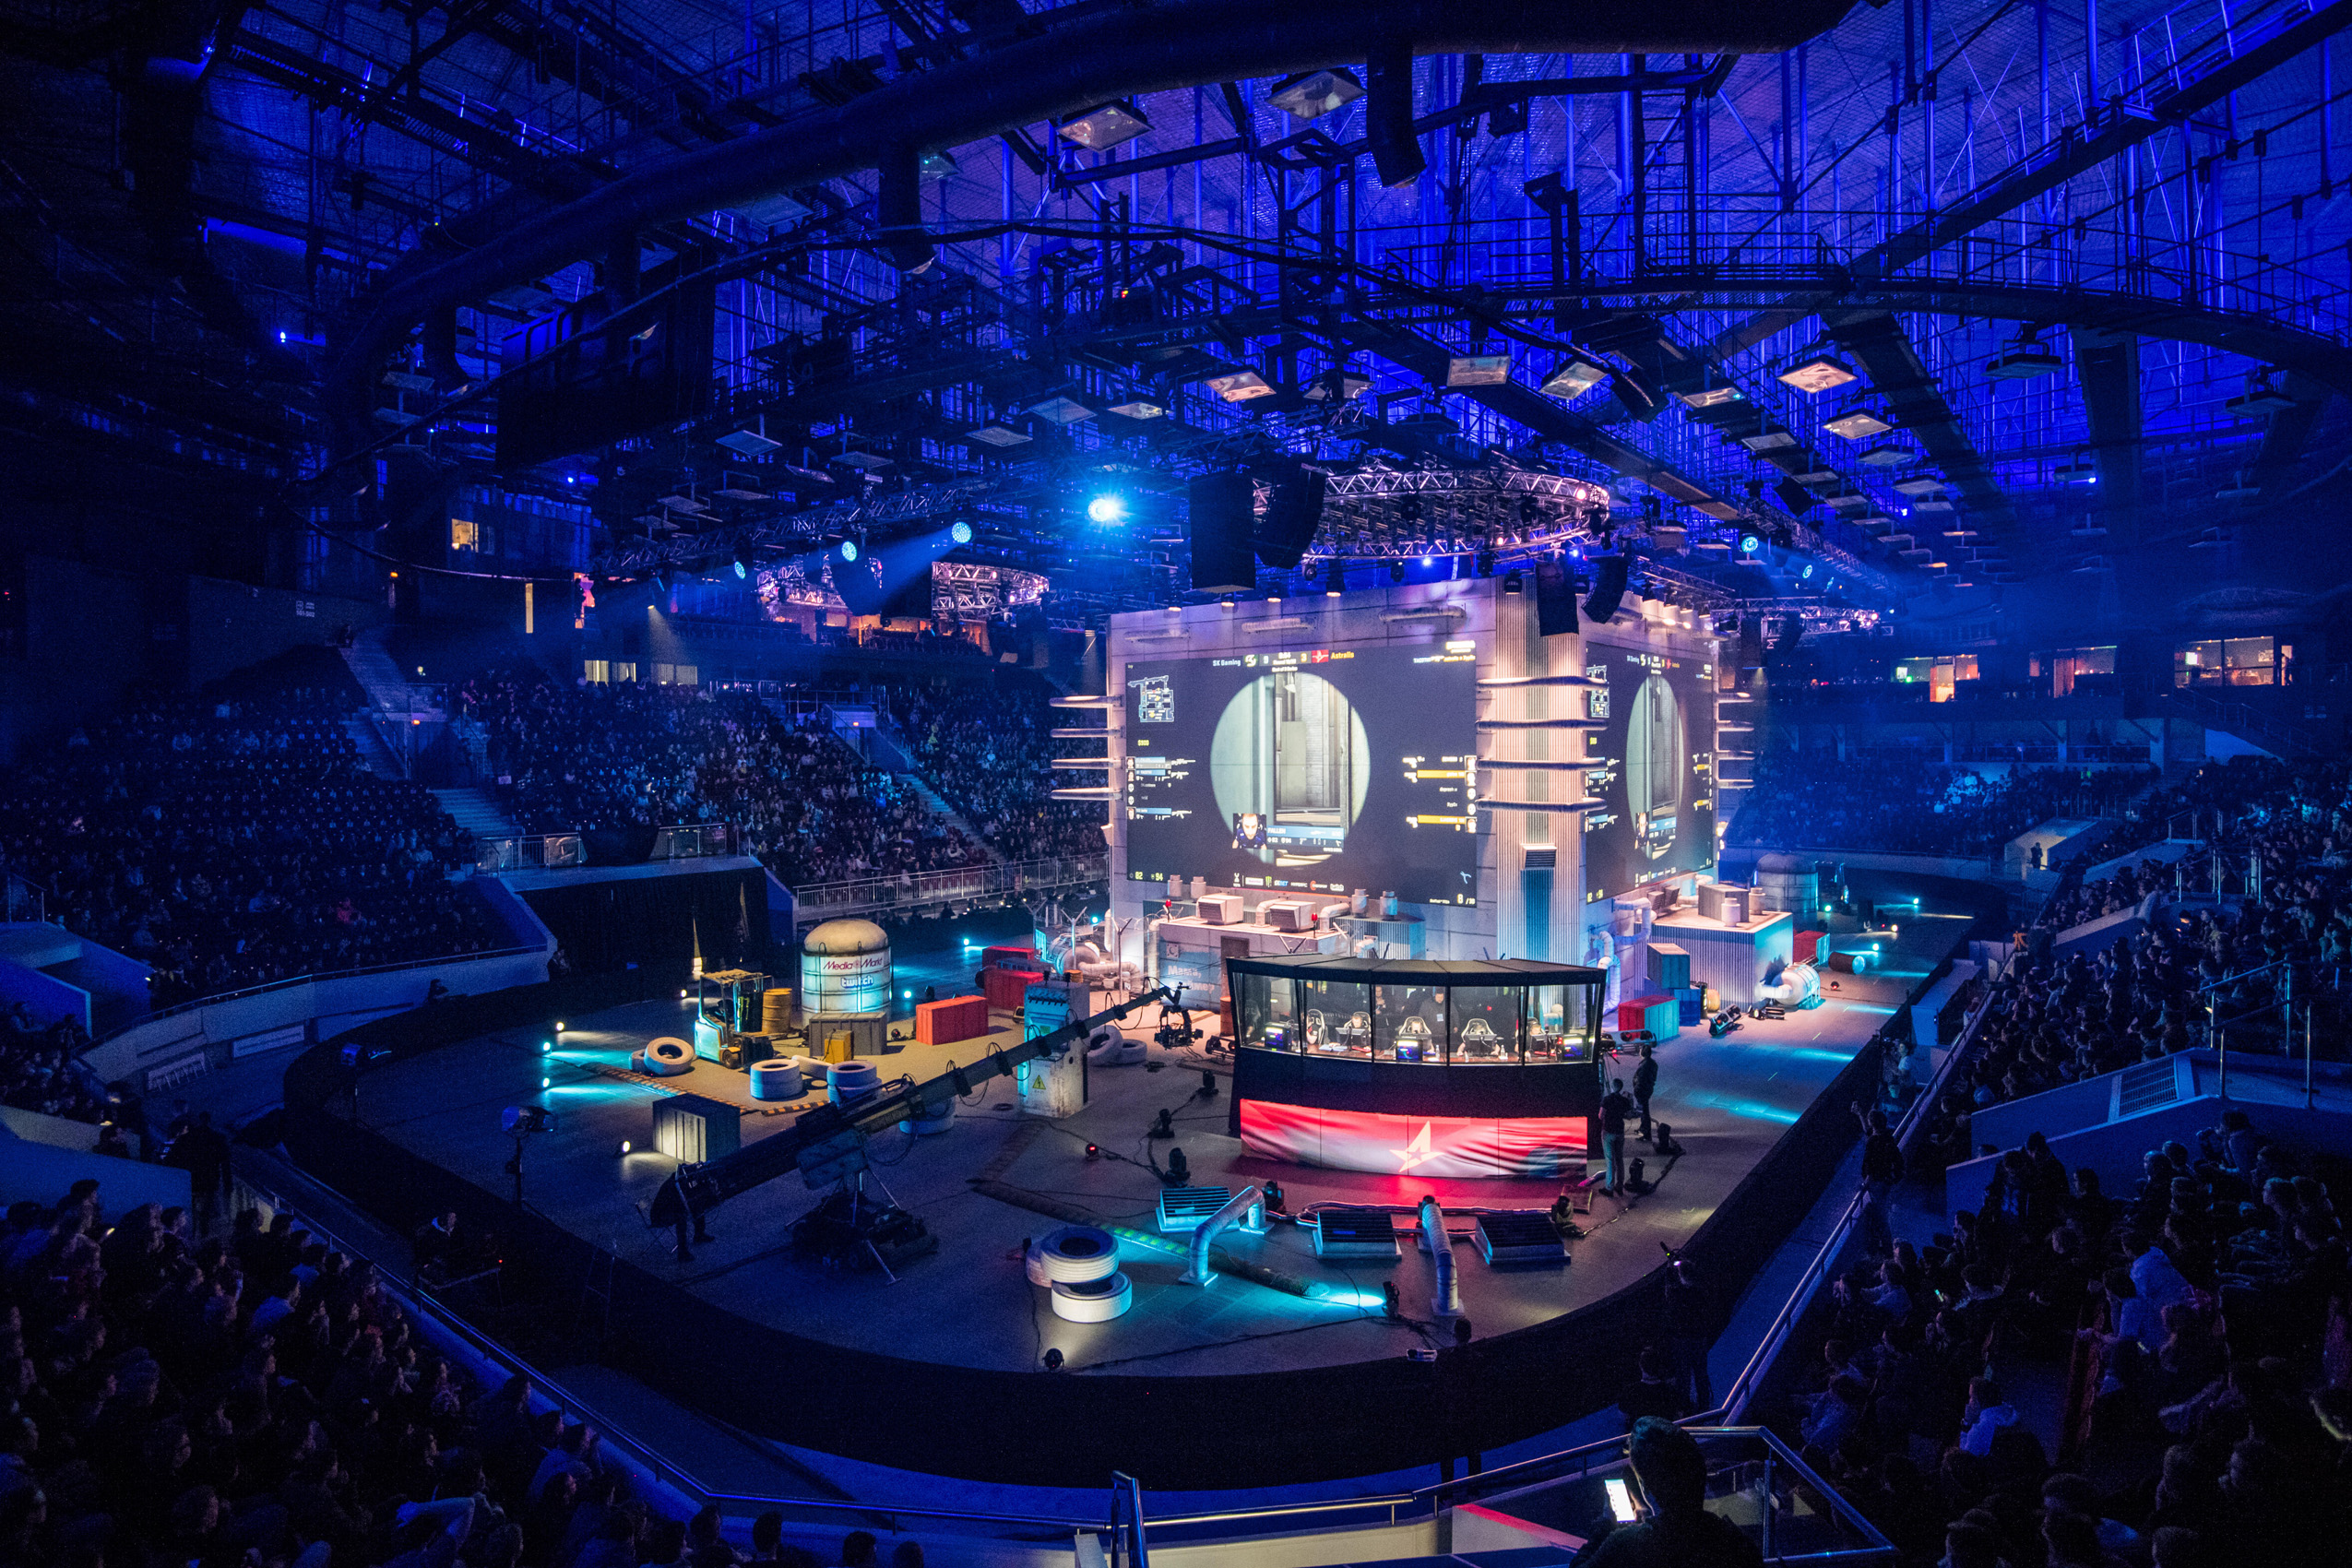 Counter-Strike: Global Offensive eSports event, St Petersburg, October 2017